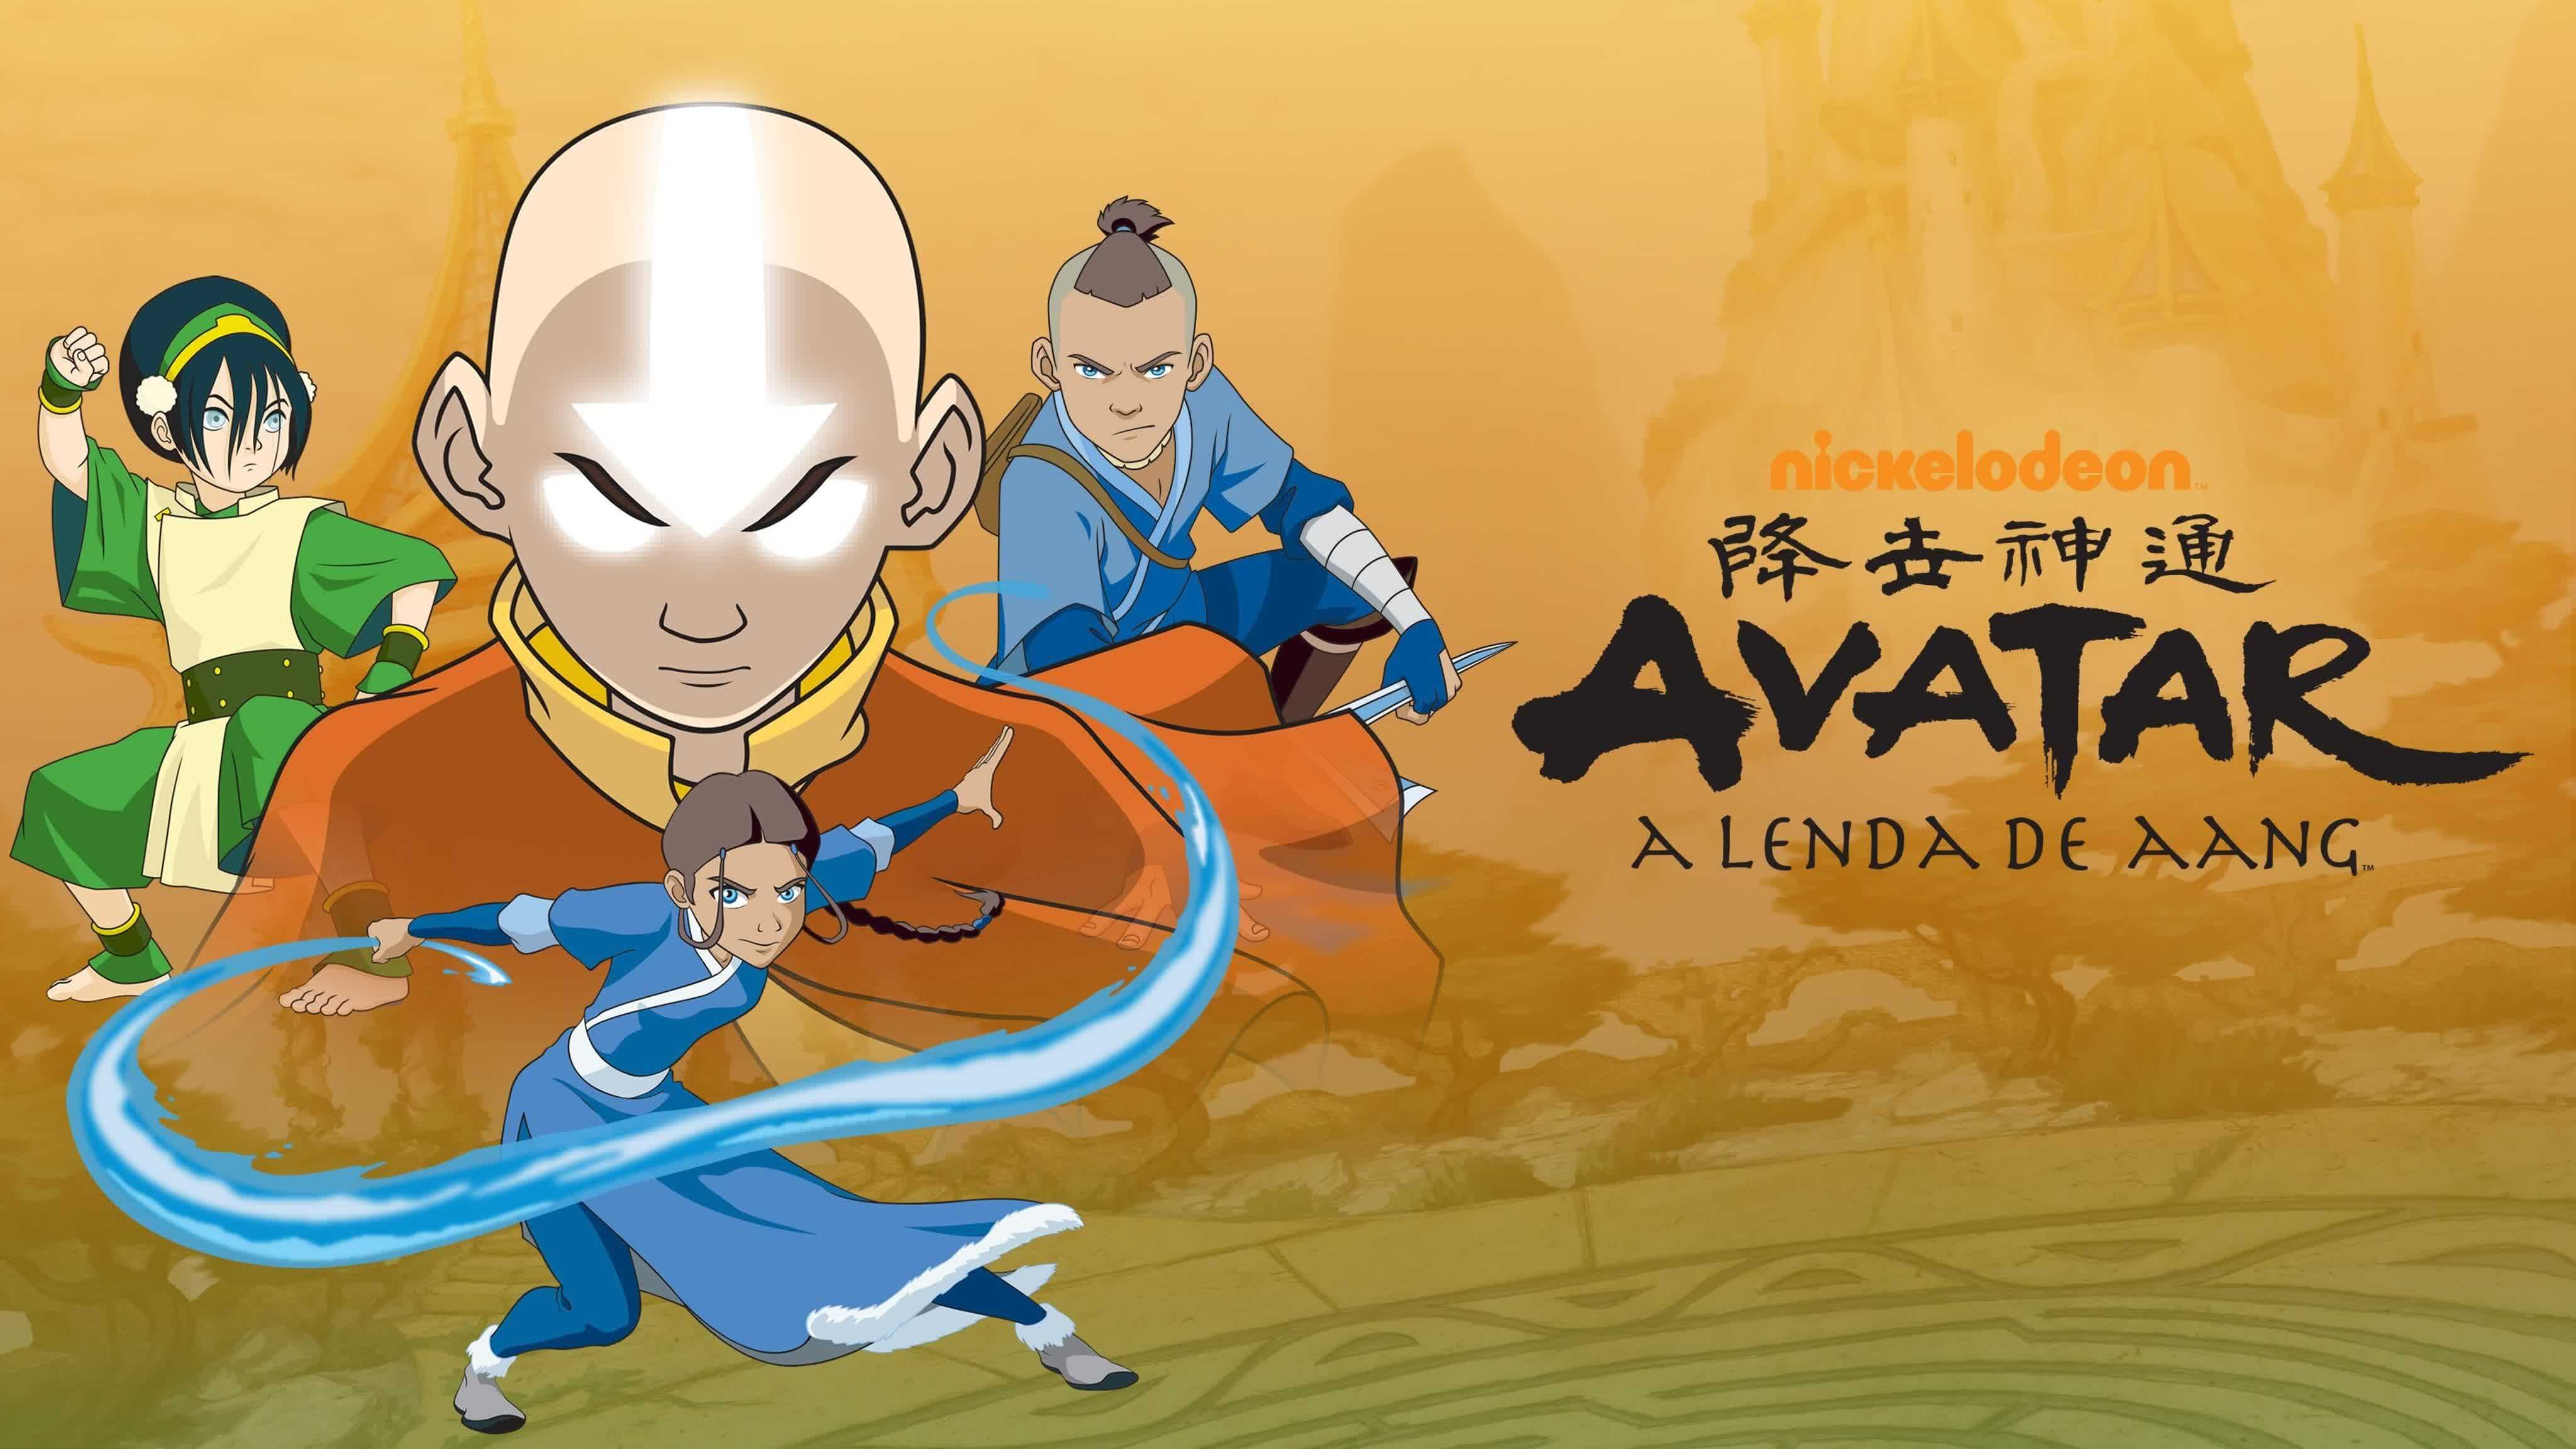 Avatar legend of aang english. Никелодеон аватар аанг.